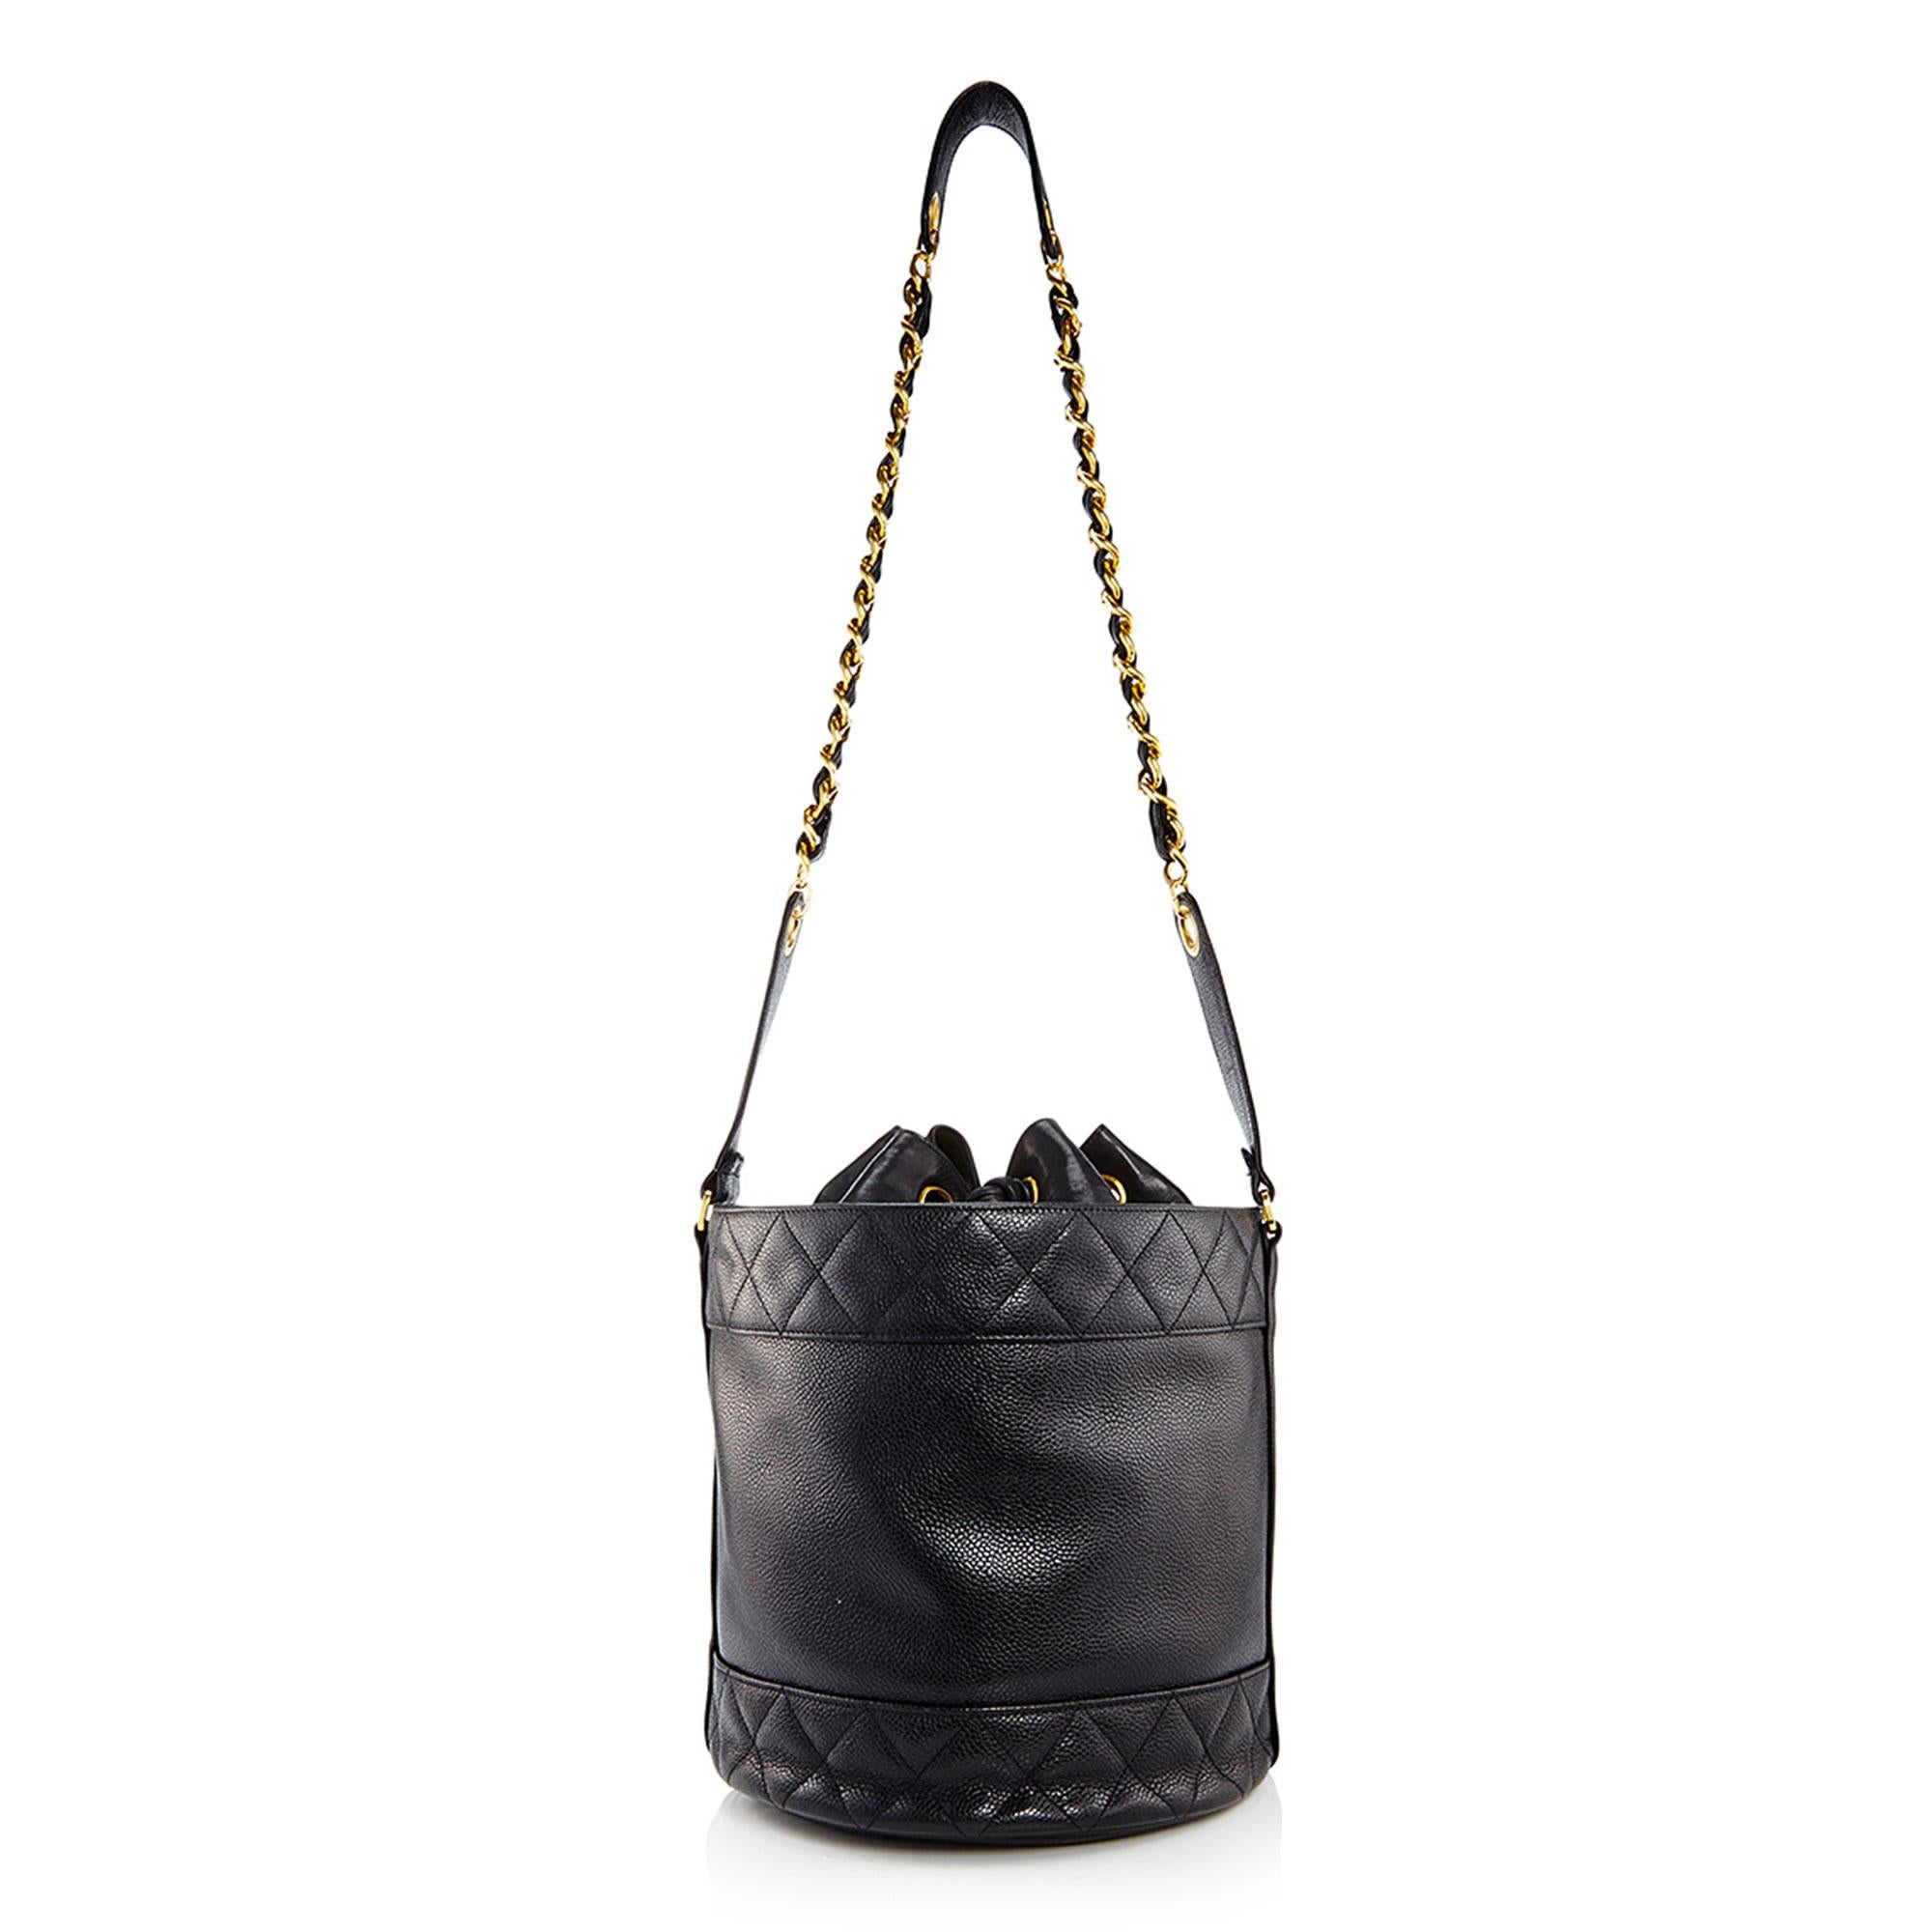 Chanel 1991 Black Caviar Leather Vintage Drawstring Drum Shaped Shoulder Bag In Good Condition For Sale In Miami, FL